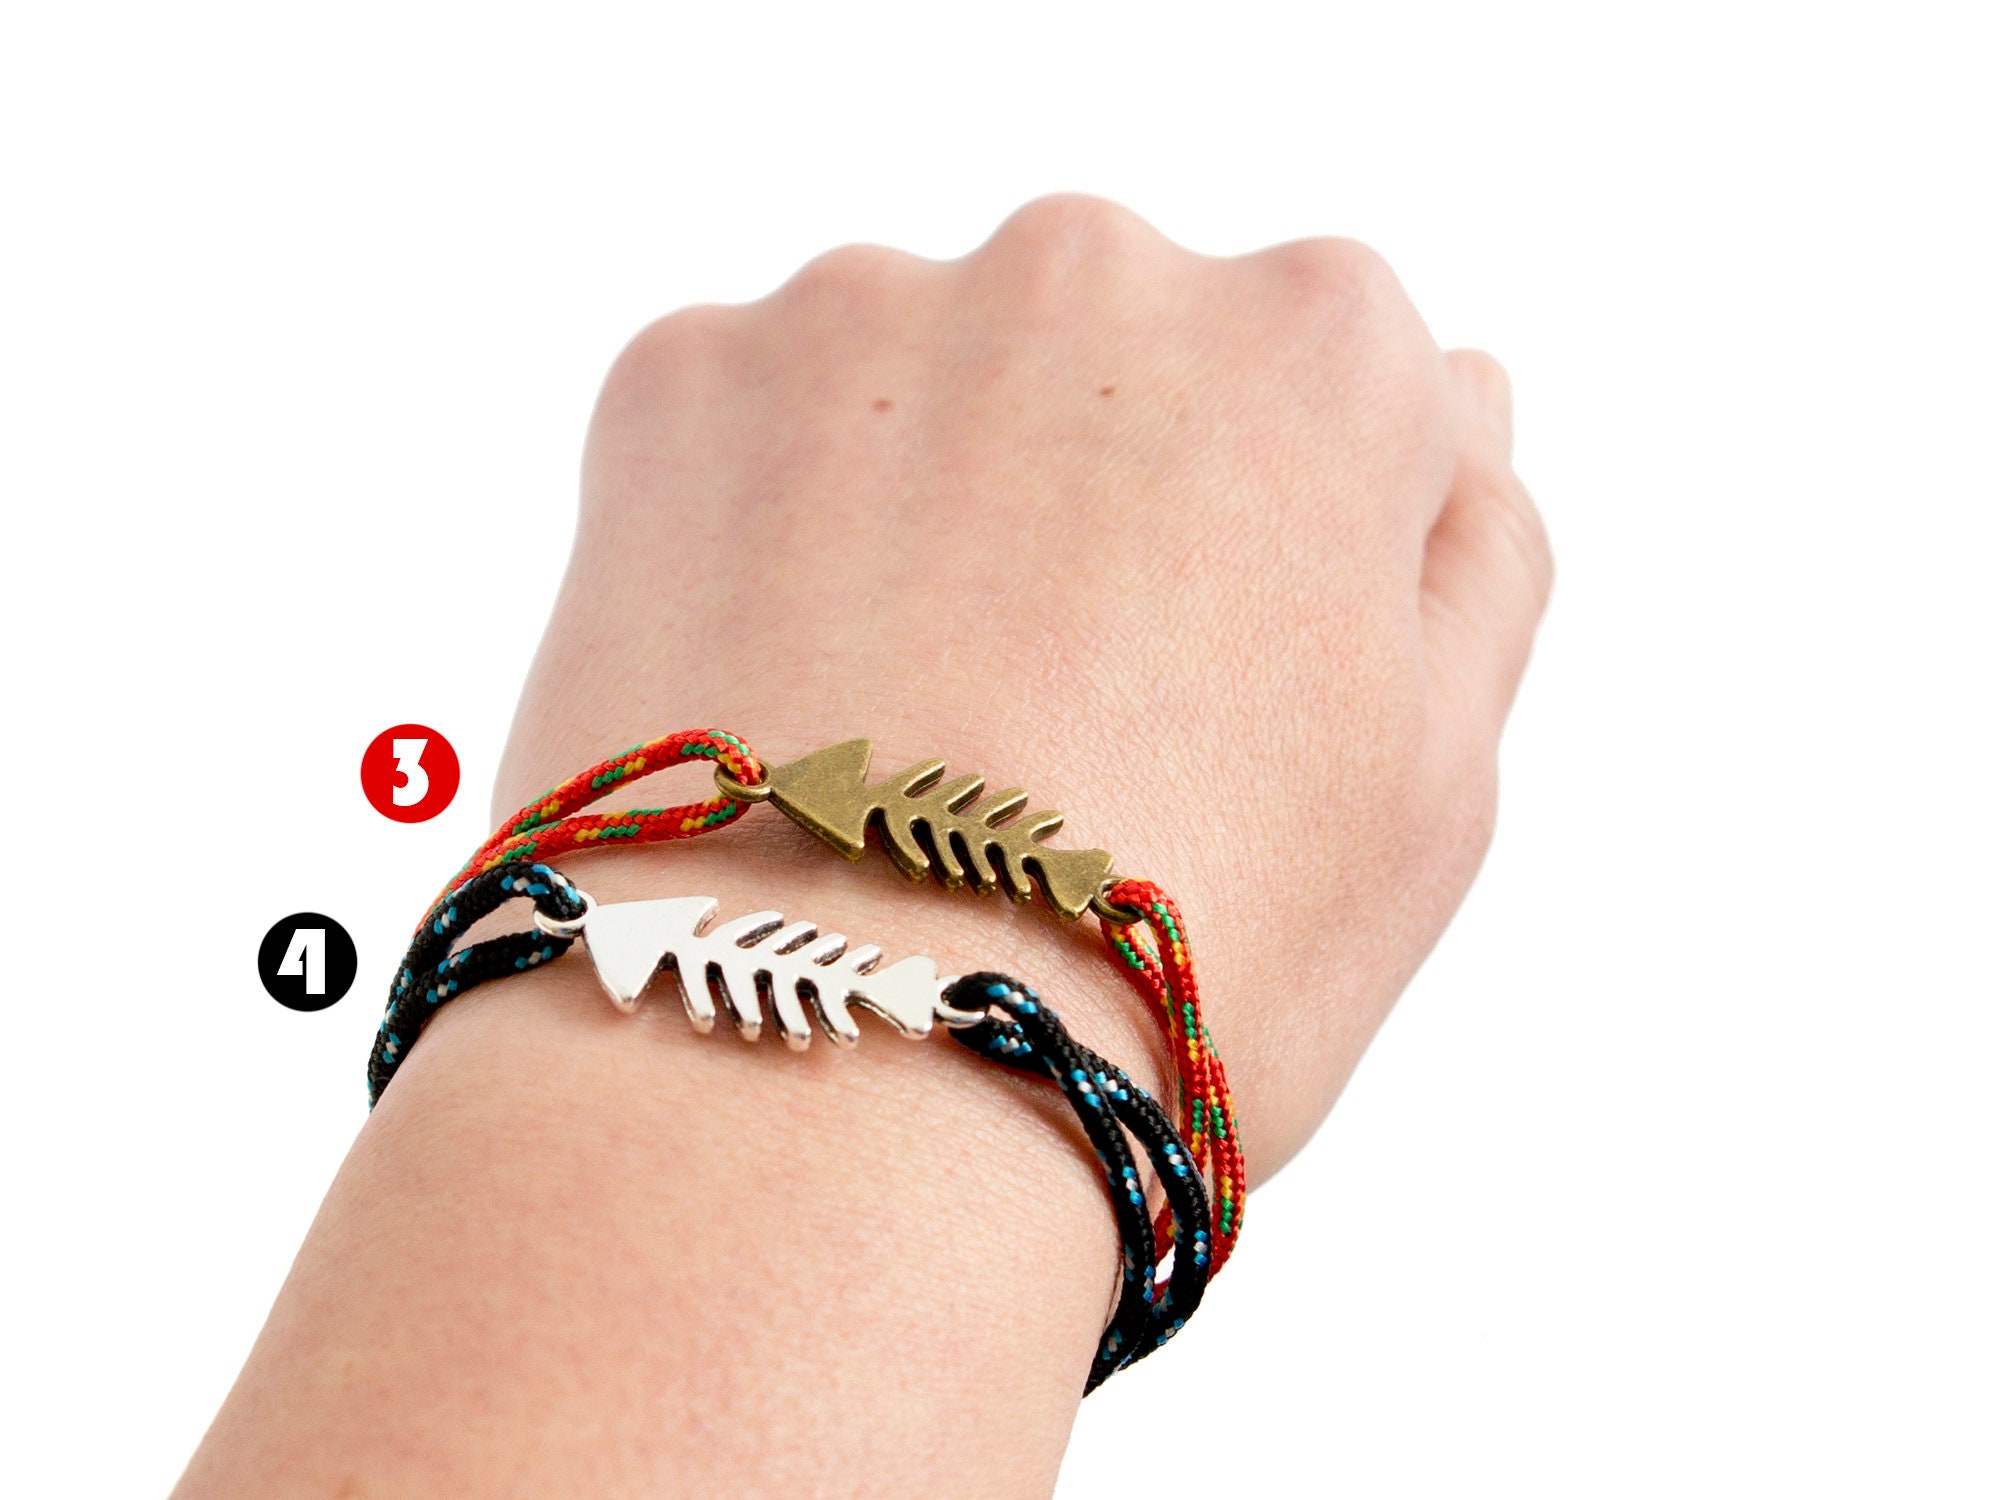 BraceletBook.com - Friendship Bracelets: Get Inspired - Our today's pick  from the patterns category: #55074 #friendship #bracelets #bracelet  #pattern #two #fish #koi #koifish. Link:  https://www.braceletbook.com/patterns/alpha/55074/ | Facebook